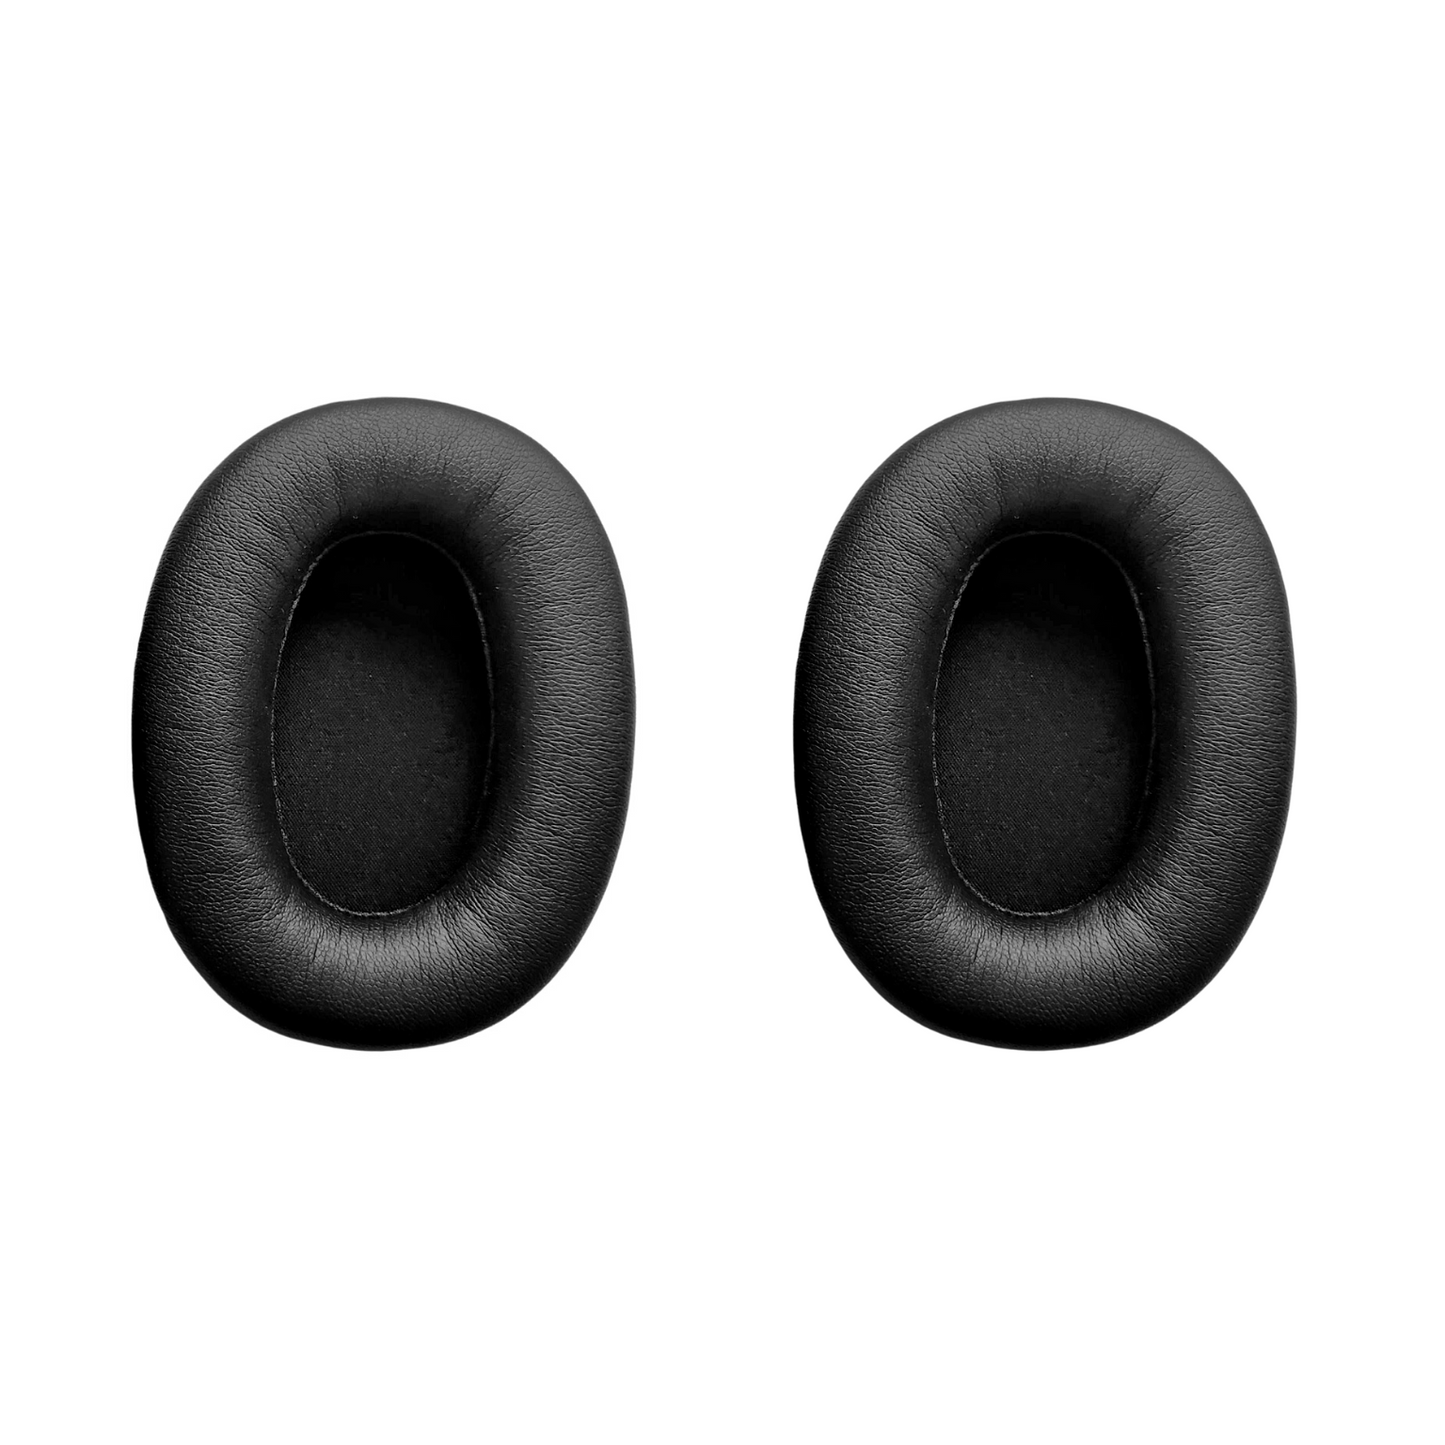 Cushion Ear Pads Replacement Set for Shenoy Audio SH010 headphones